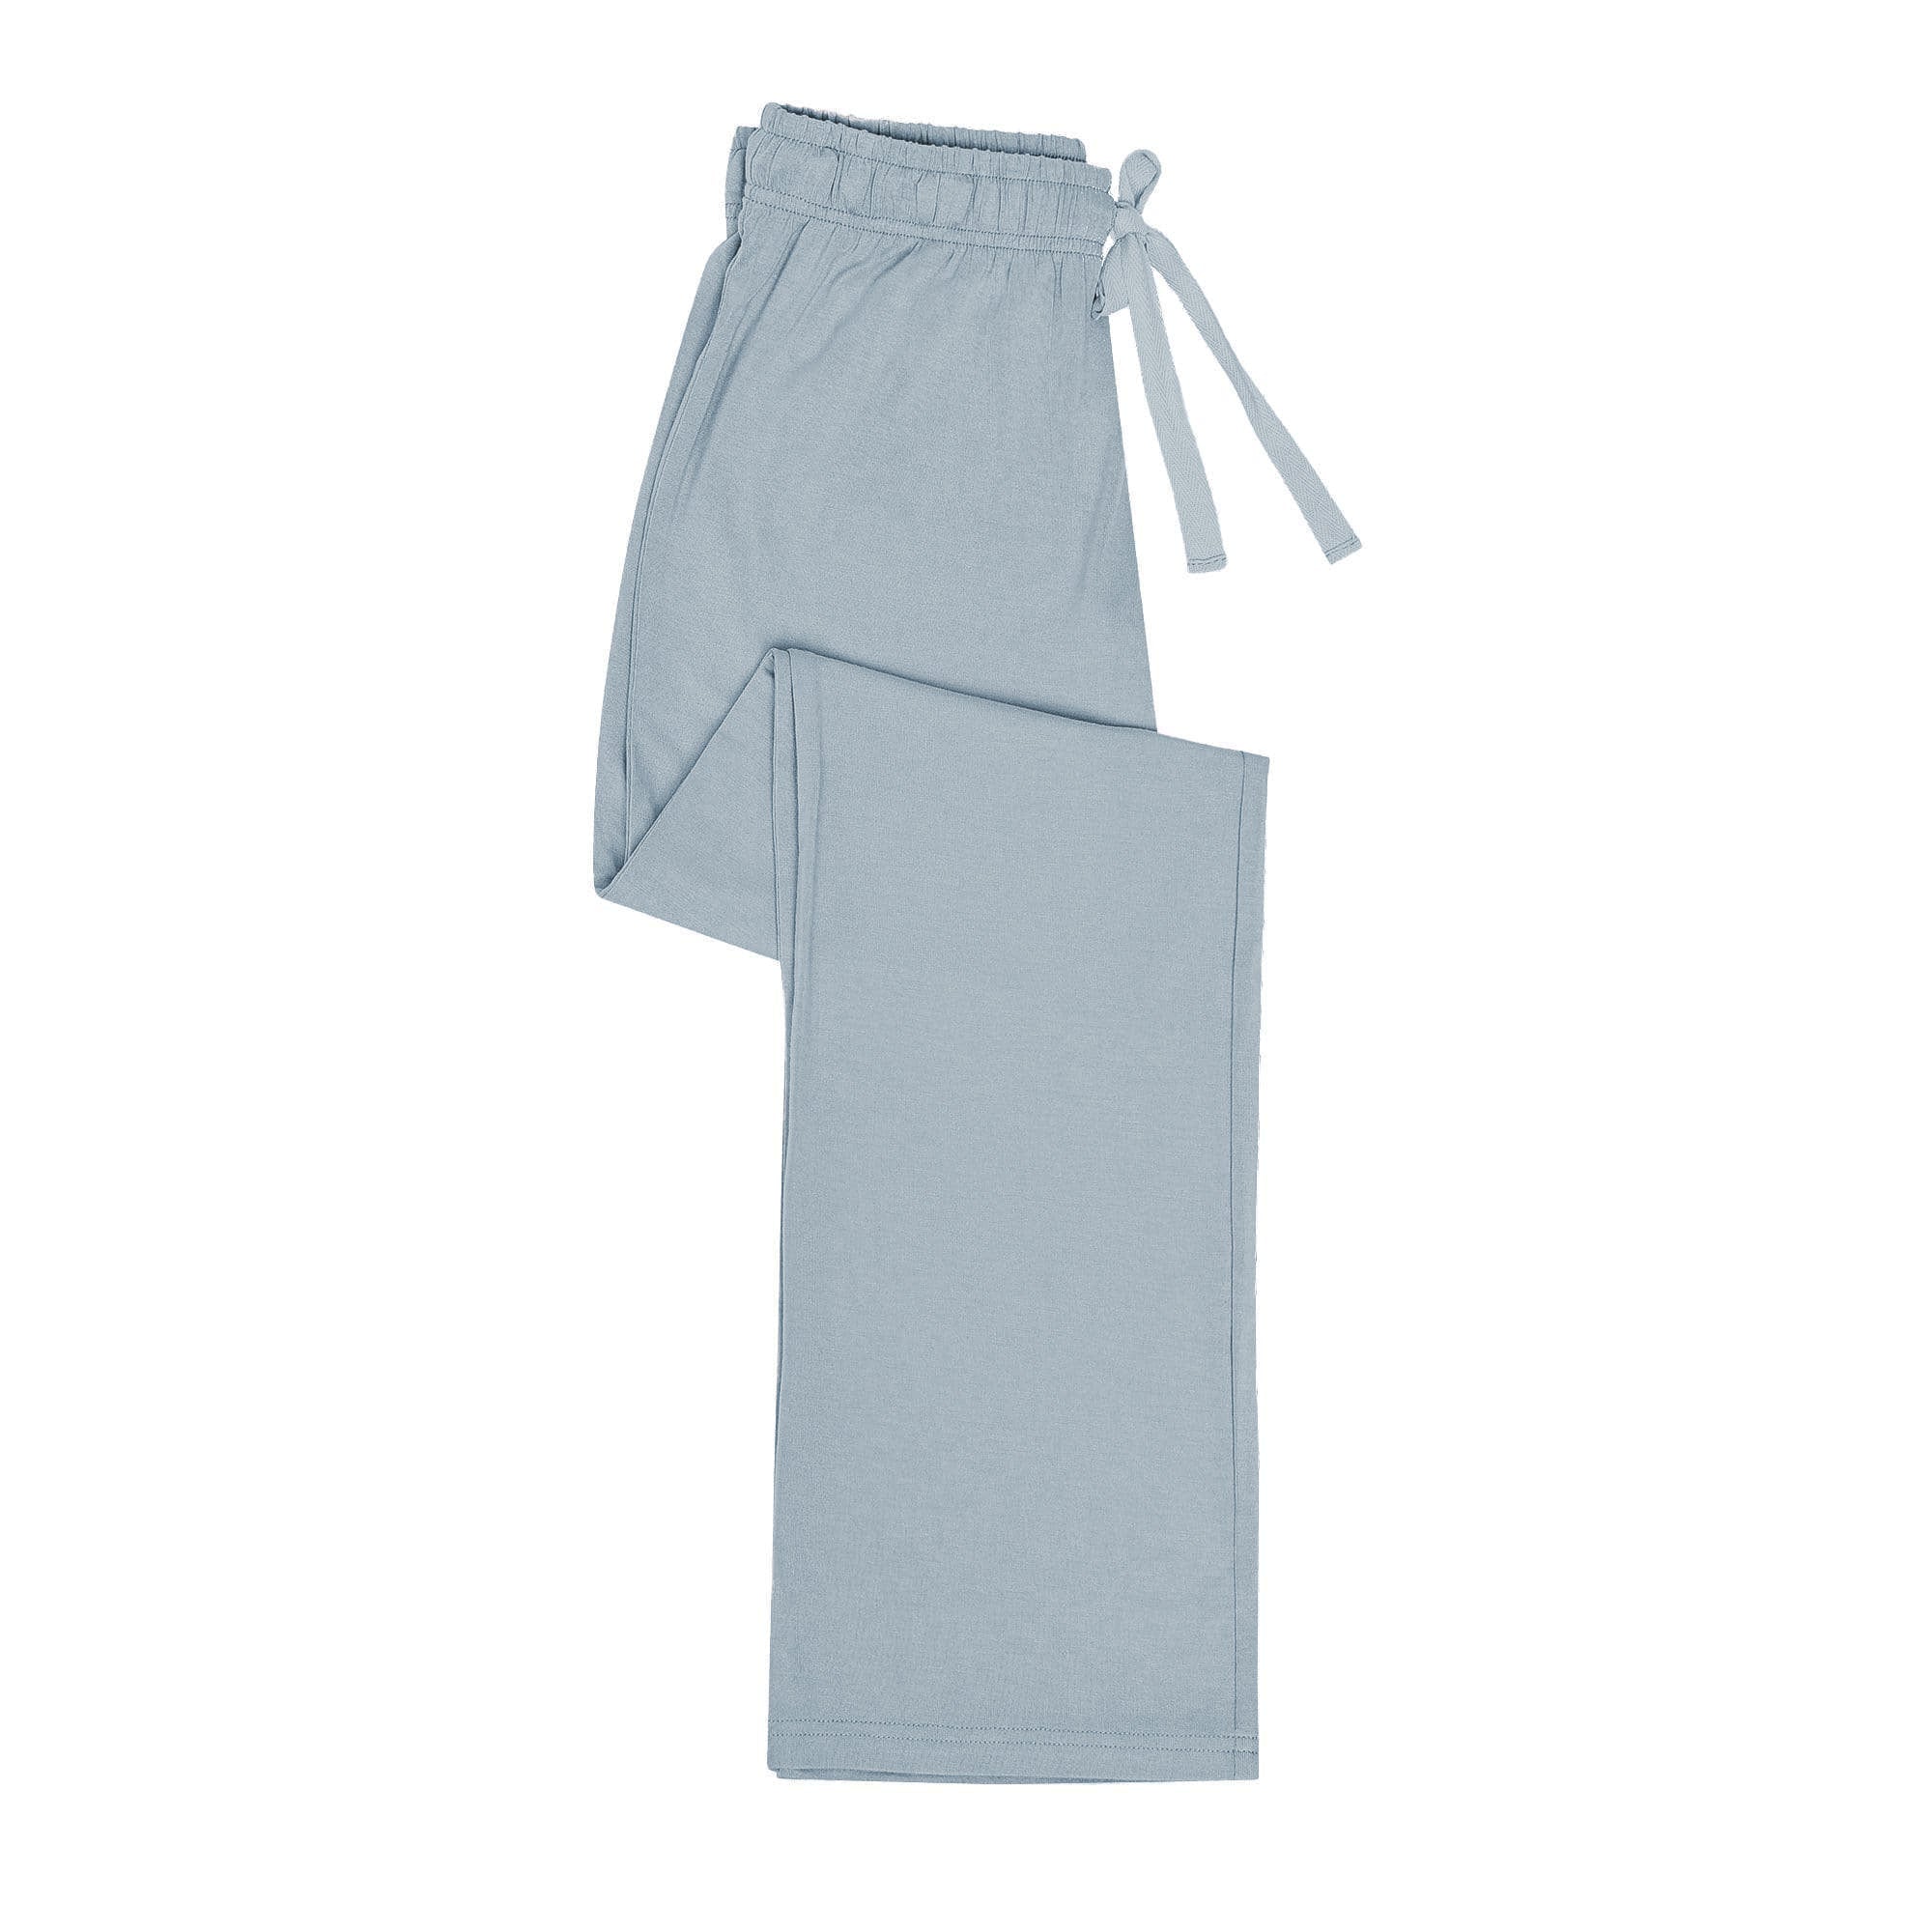 Kyte BABY Lounge Pants with pockets Women's Lounge Pants in Fog